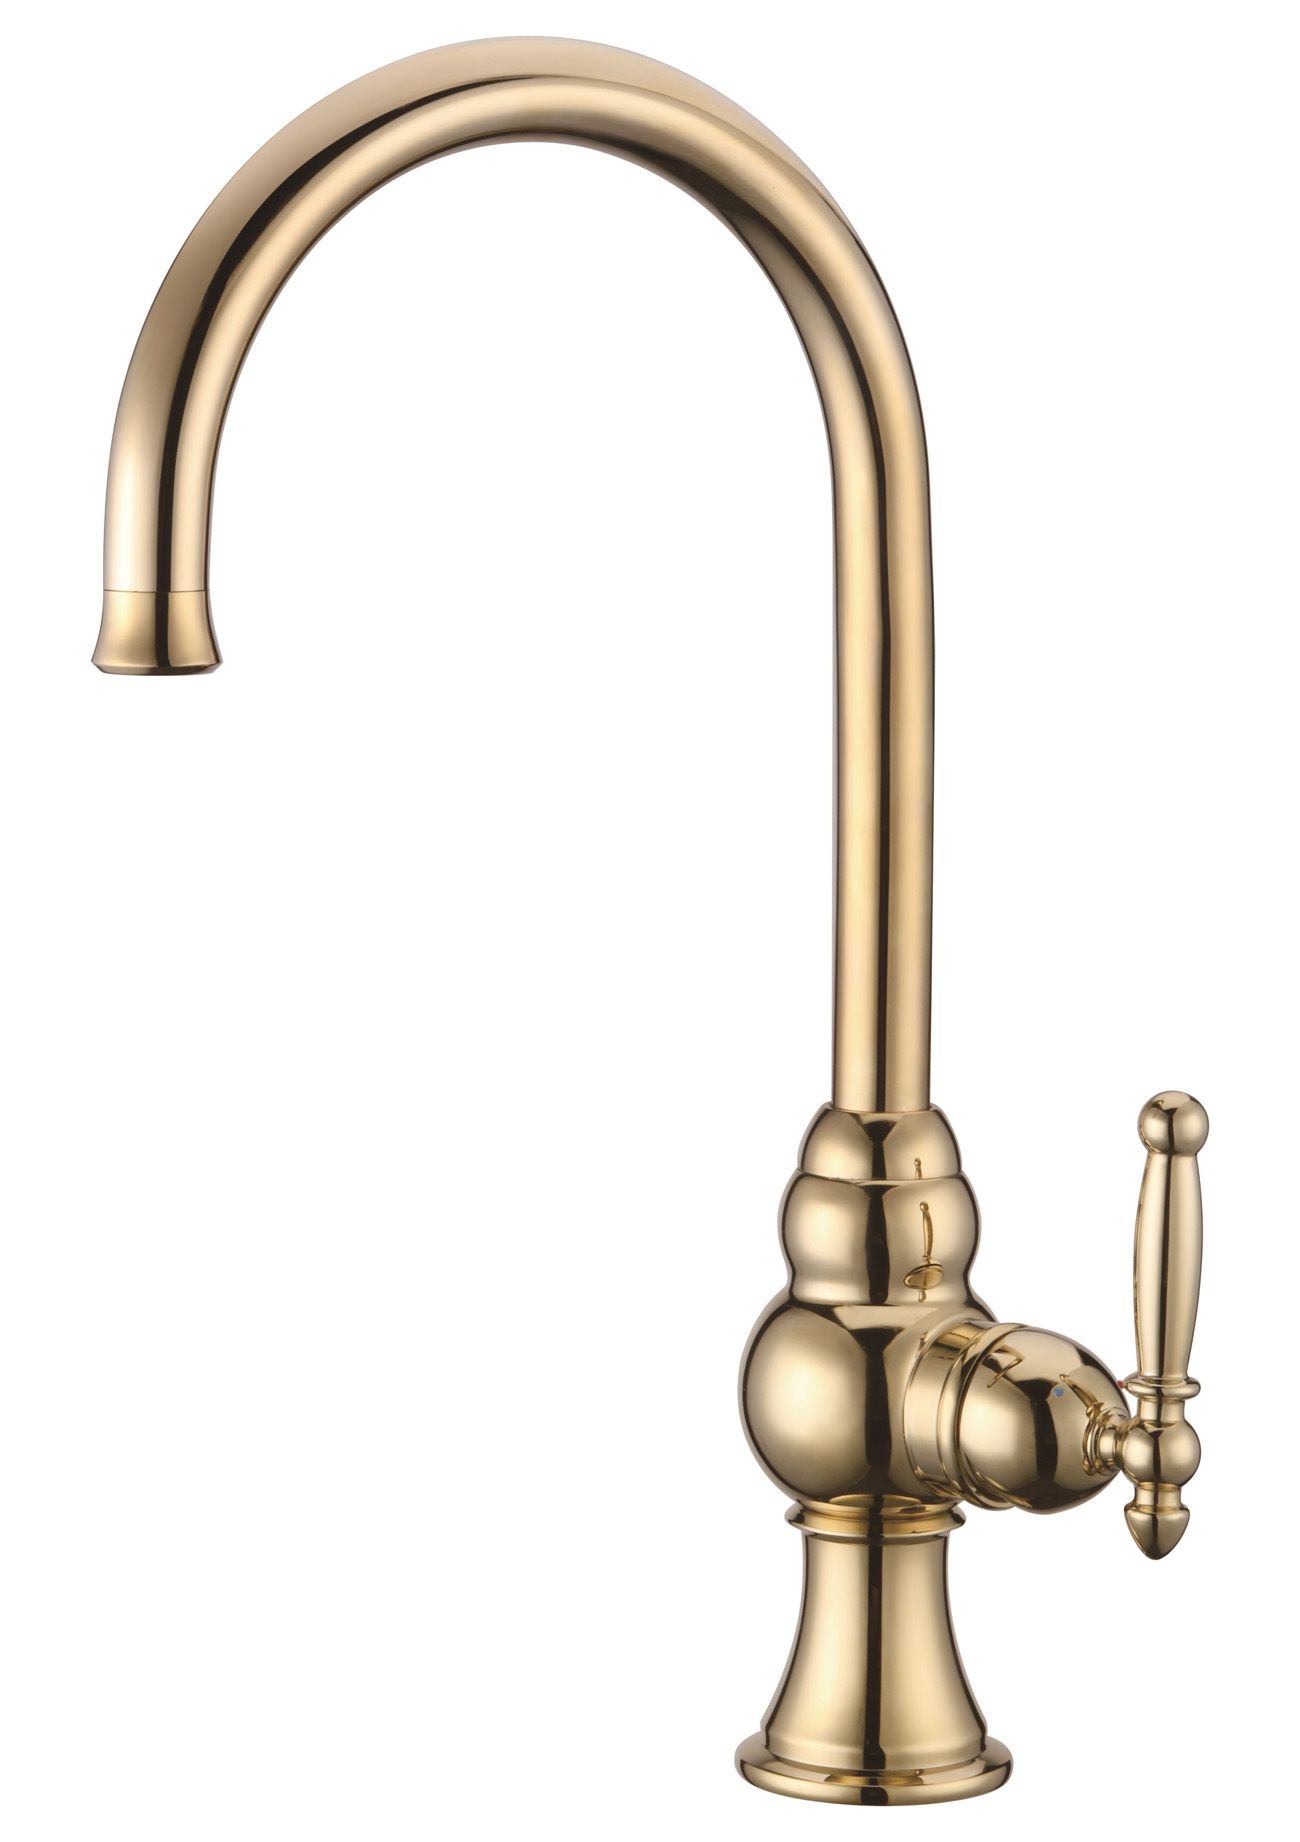 2020 Cloud Power Bathroom Sink Faucets Taps With Brass Ceramic